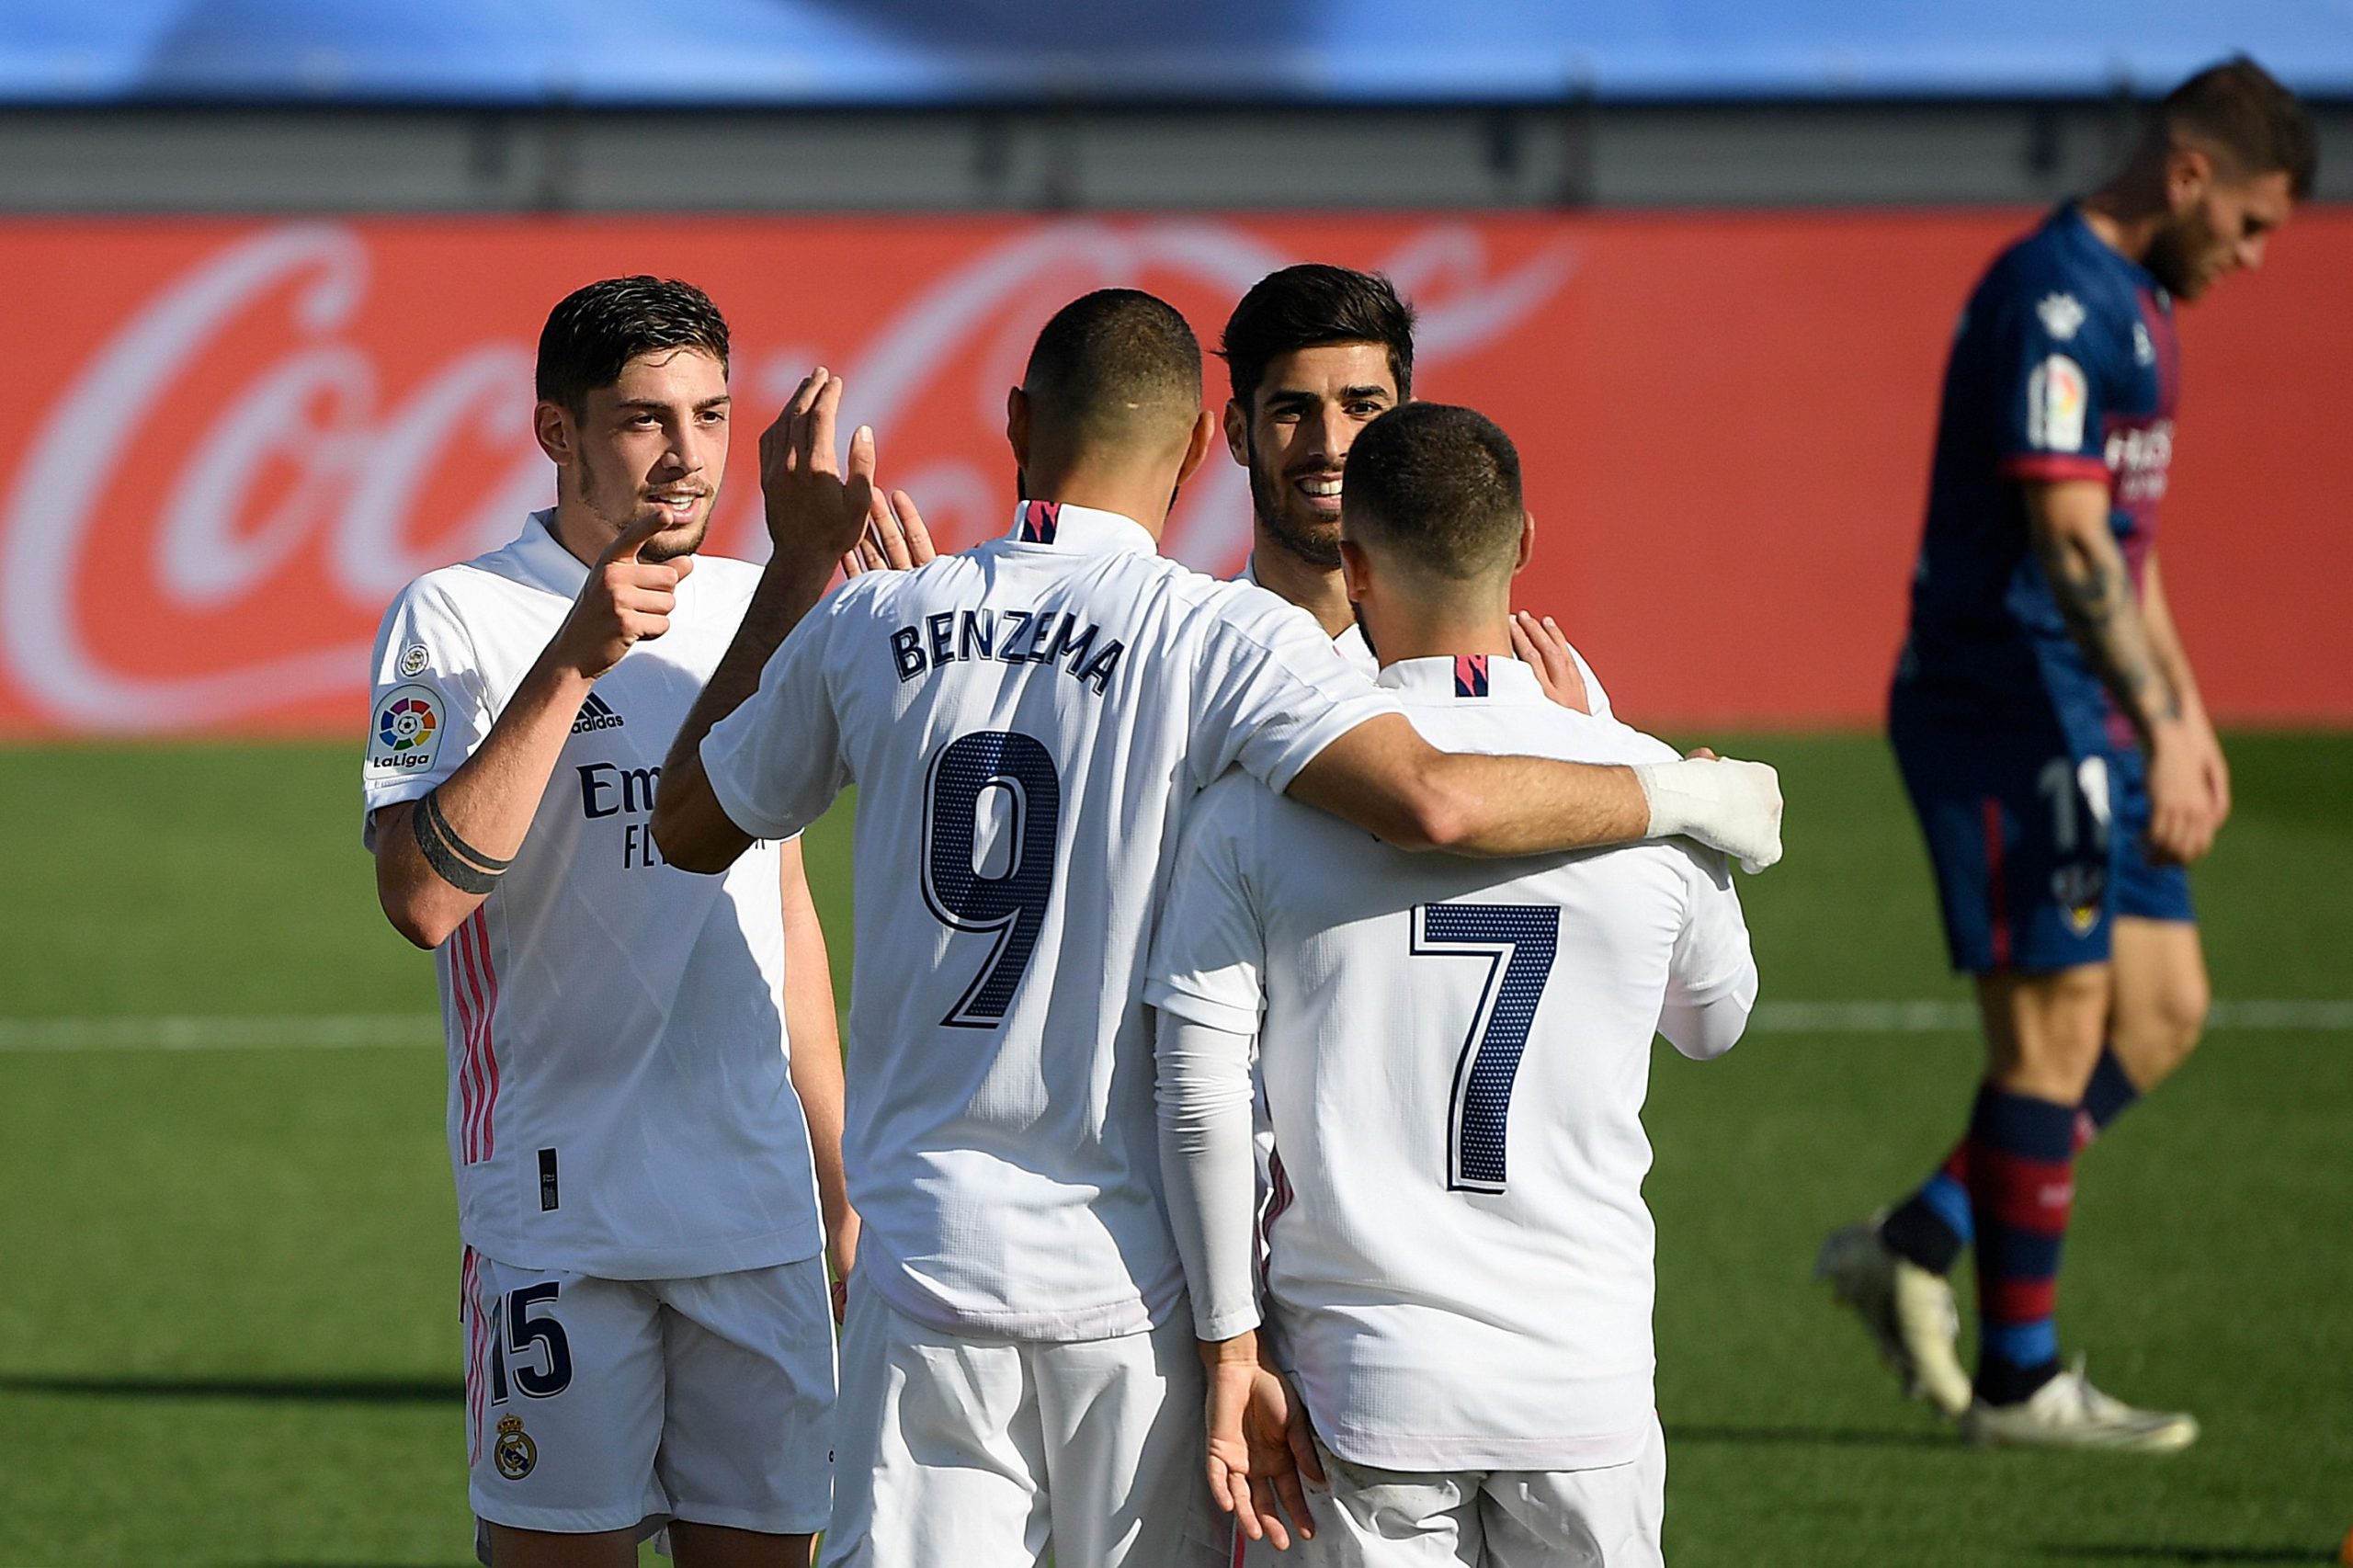 Real Madrid's Uruguayan midfielder Federico Valverde (L) celebrates with teammates after scoring his team's third goal during the Spanish League football match between Real Madrid and SD Huesca at the Alfredo Di Stefano stadium in Valdebebas, northeastern Madrid, on October 31, 2020. (Photo by OSCAR DEL POZO / AFP) (Photo by OSCAR DEL POZO/AFP via Getty Images)